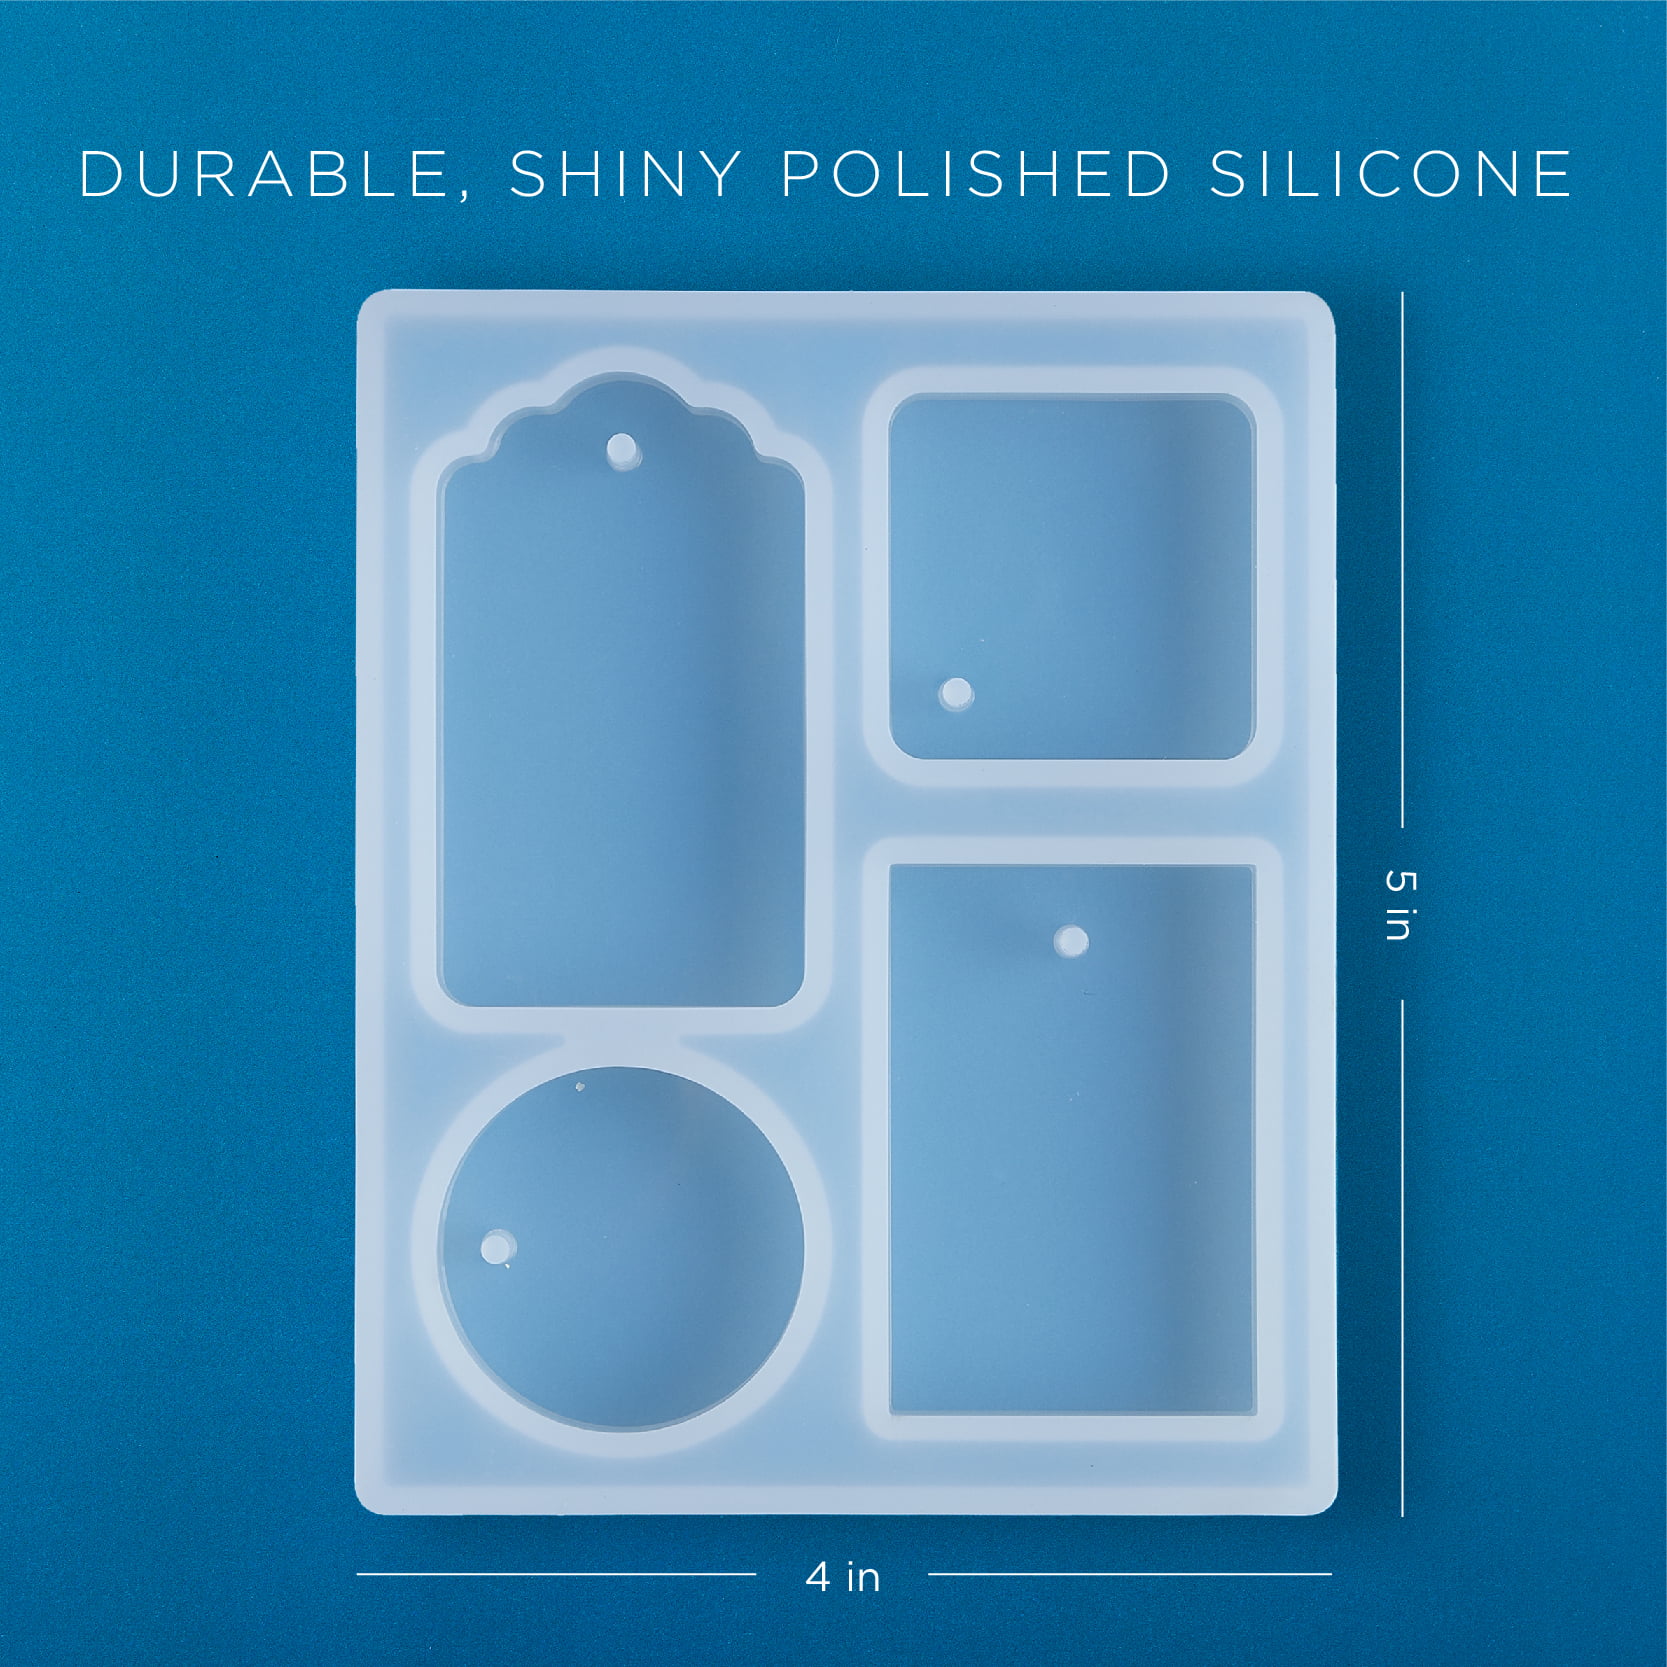 Mod Podge Silicone Resin Mold Set, Square, Set of 3, Clear